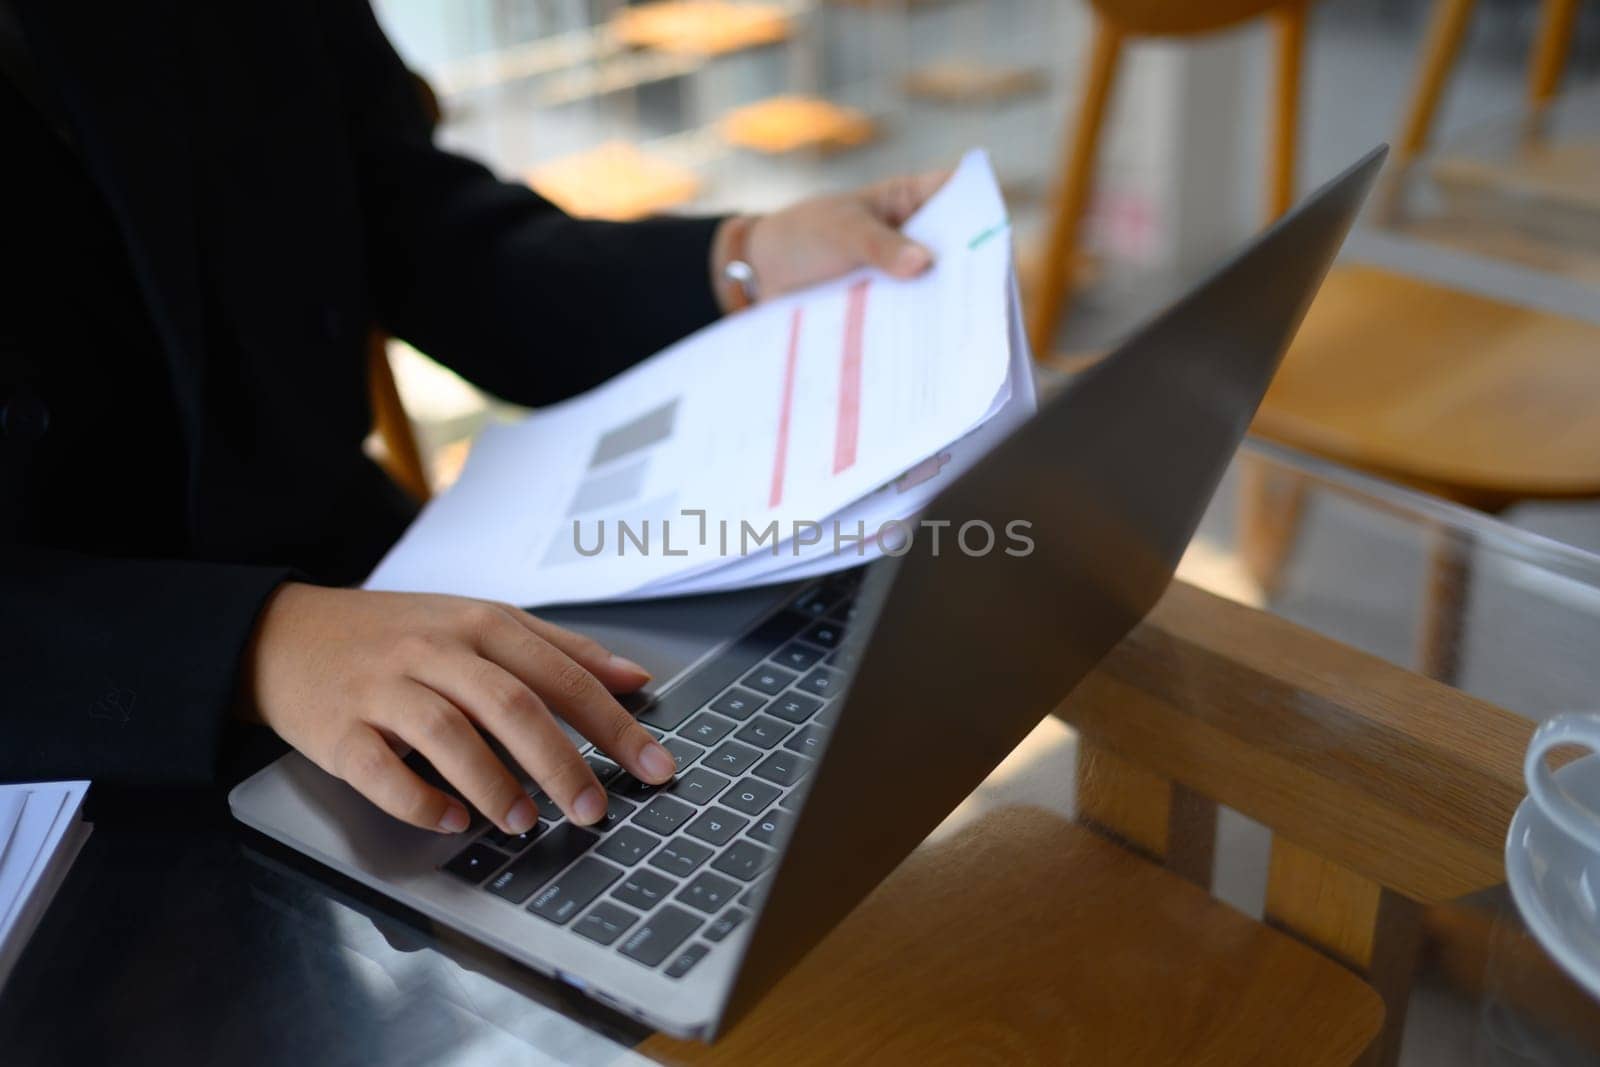 Finance Investment analyst holding documents and using laptop at office desk.